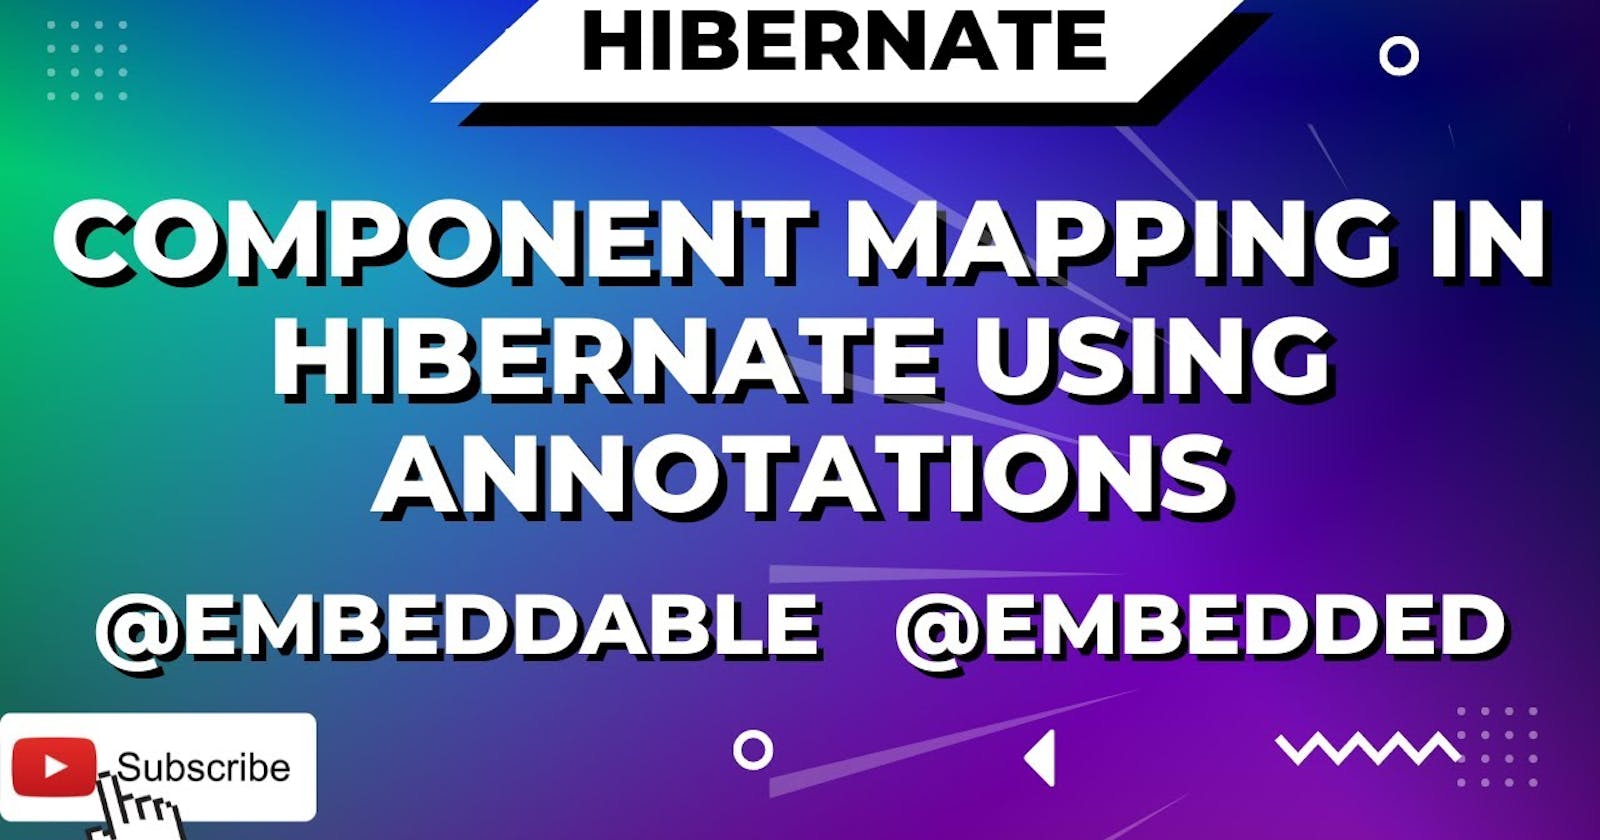 Component Mapping in Hibernate Using Annotations